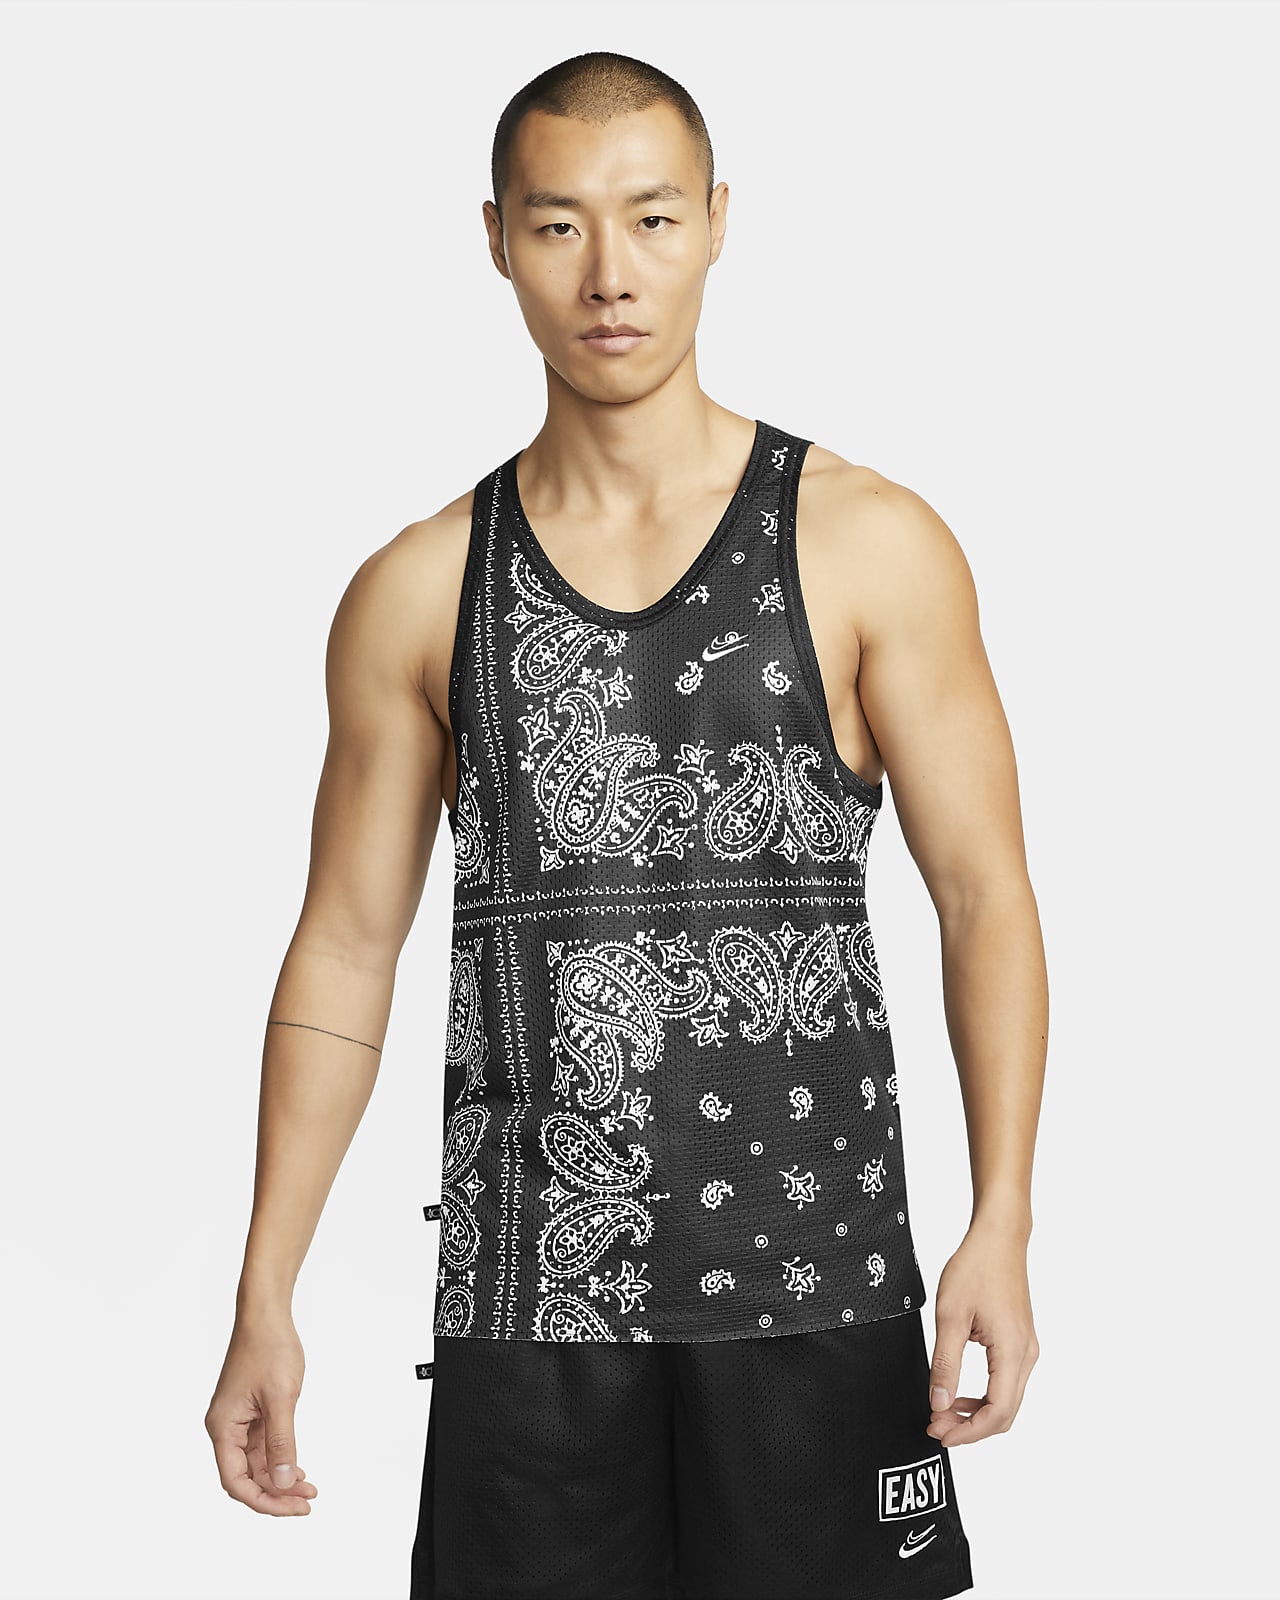 https://static.nike.com/a/images/t_PDP_1280_v1/f_auto,q_auto:eco/84cb4bf5-991d-4b8b-9de3-e2b0d54b800e/dri-fit-kd-sleeveless-top-M9ws1p.png